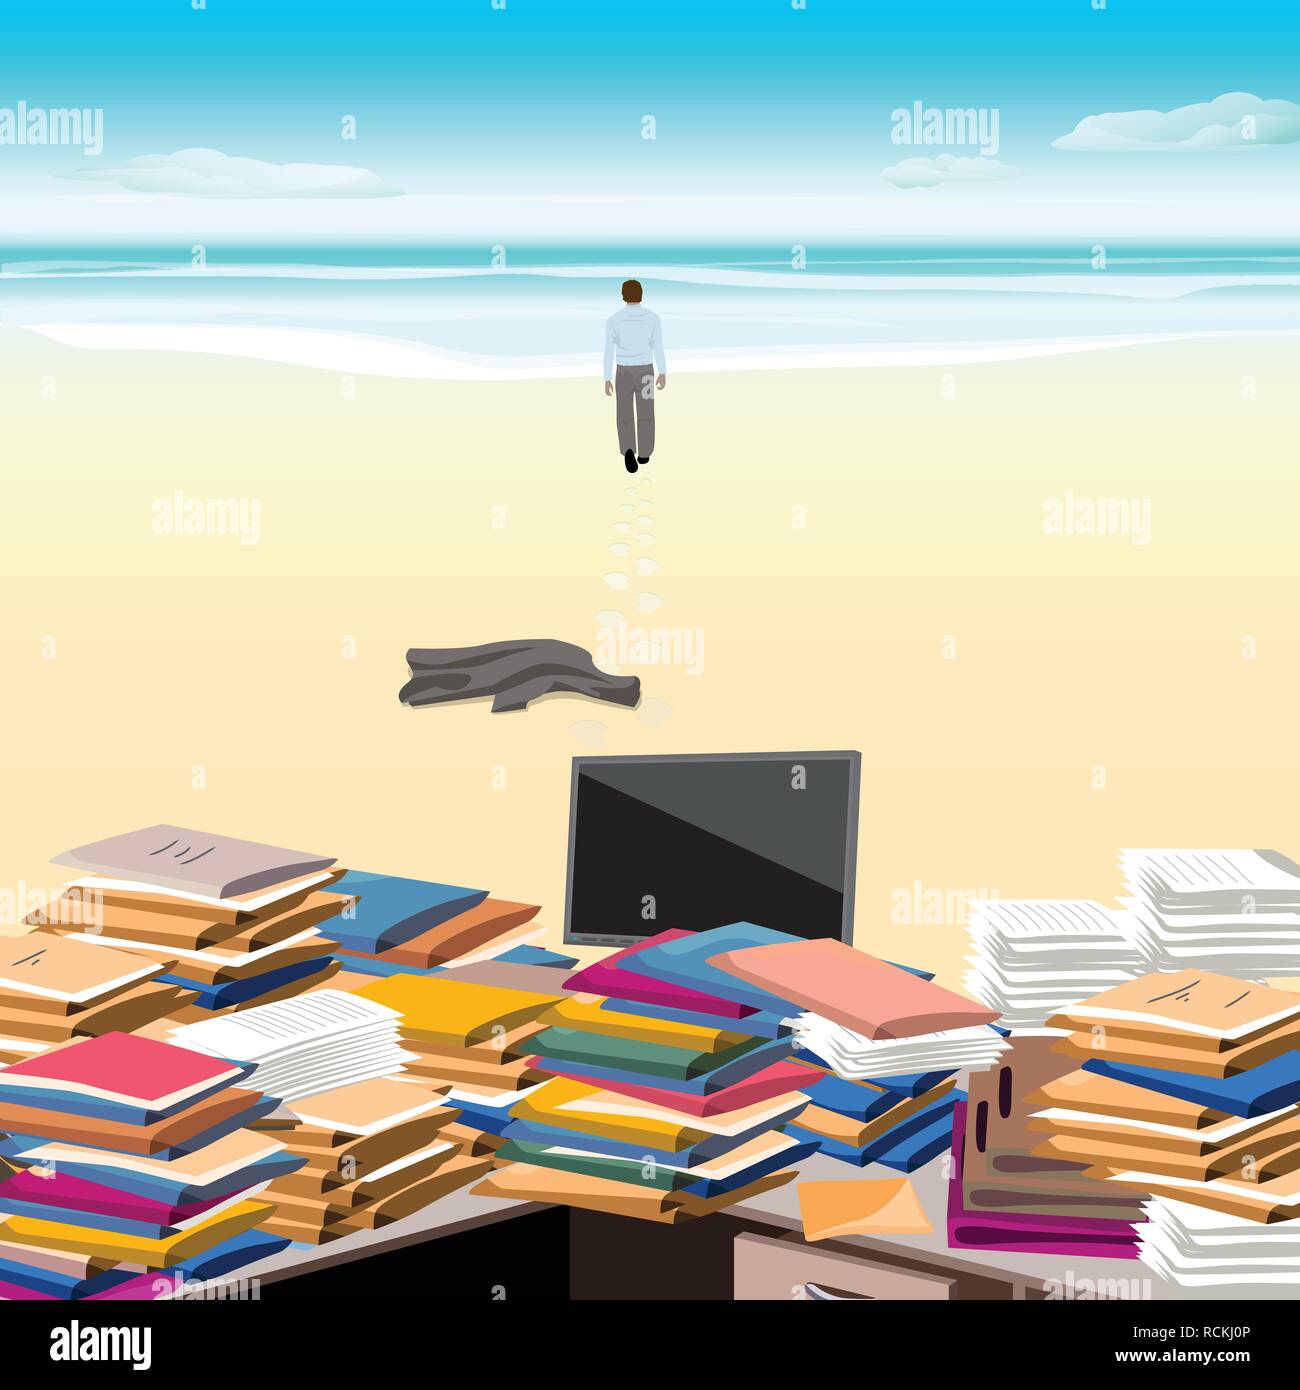 Cluttered. Beach. One goes along the beach away from the cluttered desktop, throwing jacket . Vector illustration. Stock Vector